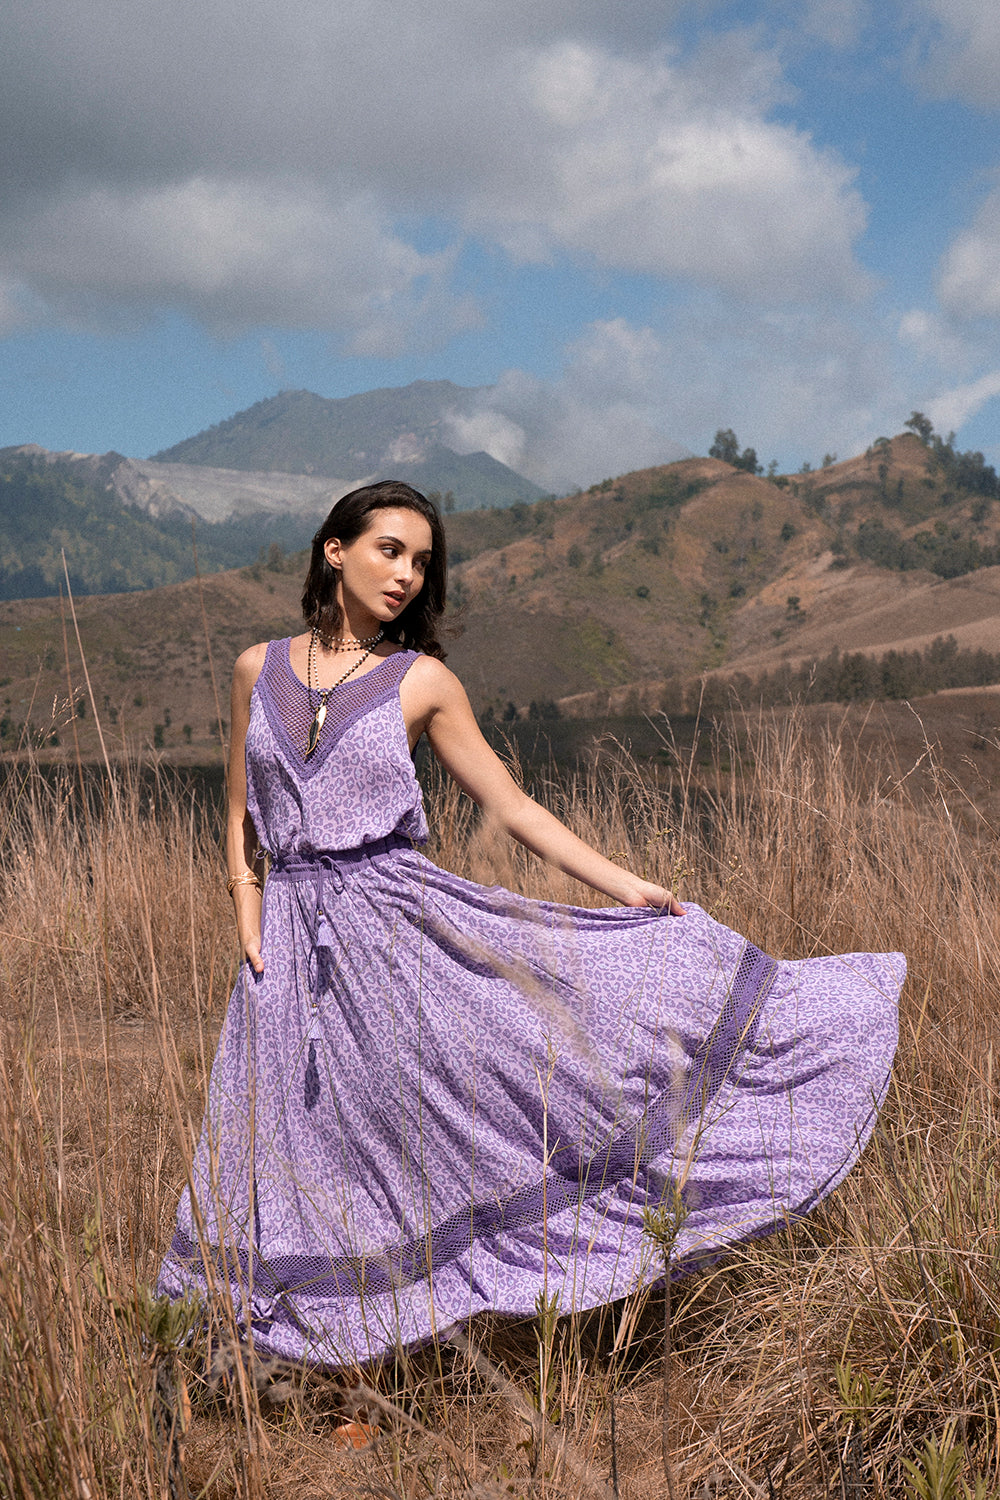 Lily Maxi Skirt - Lilac - Into the Wild by Tulle and Batiste